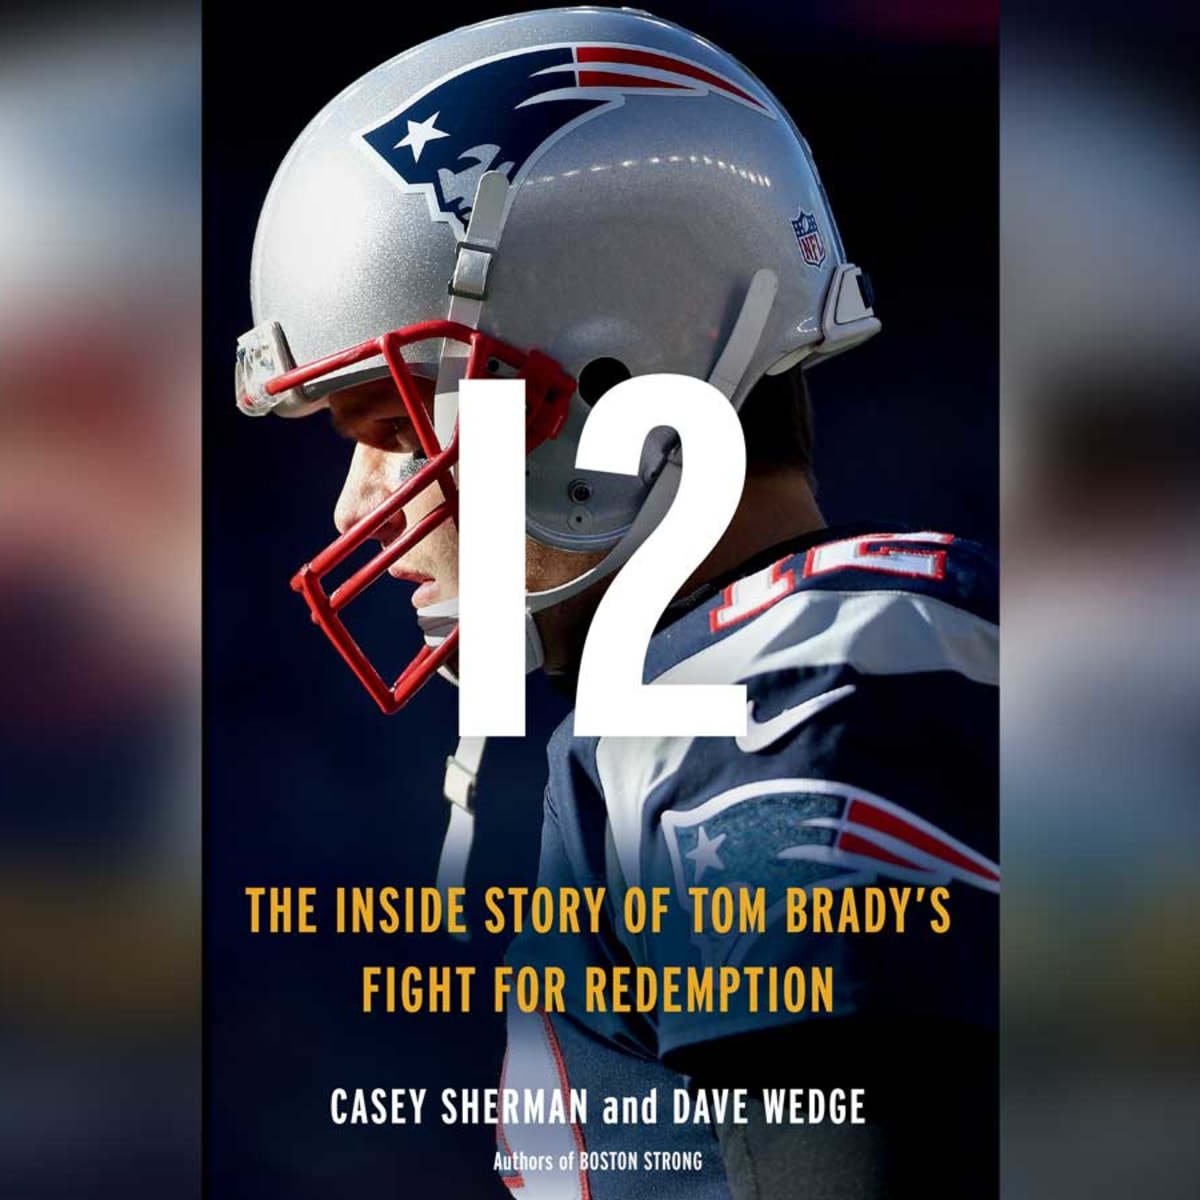 The Guy Catches the F*cking Ball on His Helmet': Tom Brady on